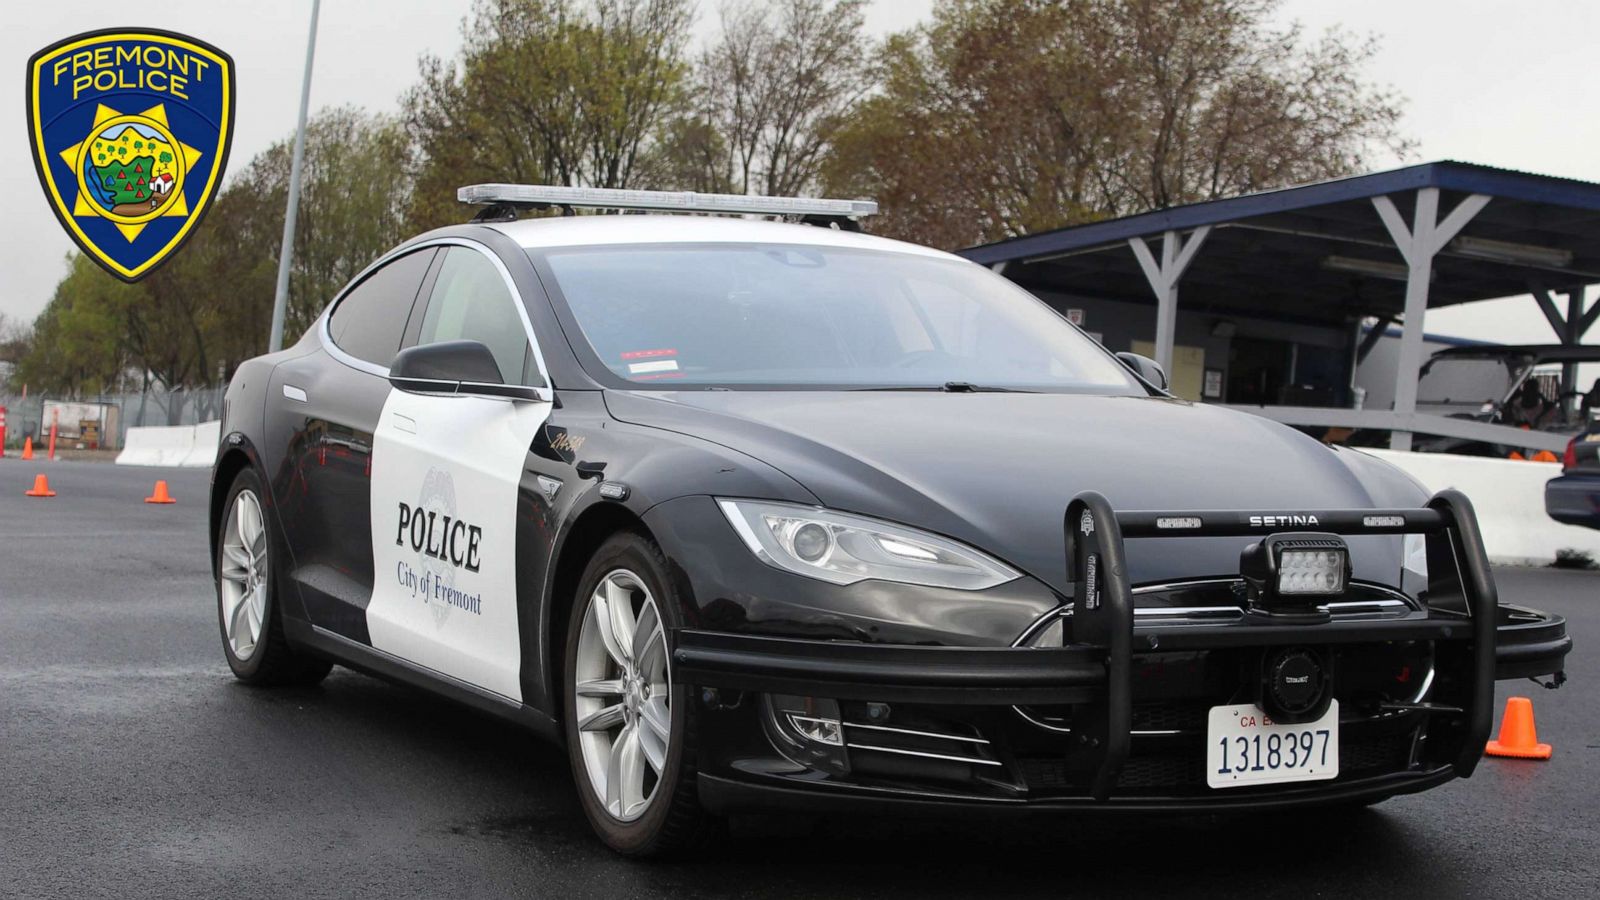 Nouvelle voiture police aux USA : la Ford Taurus Police